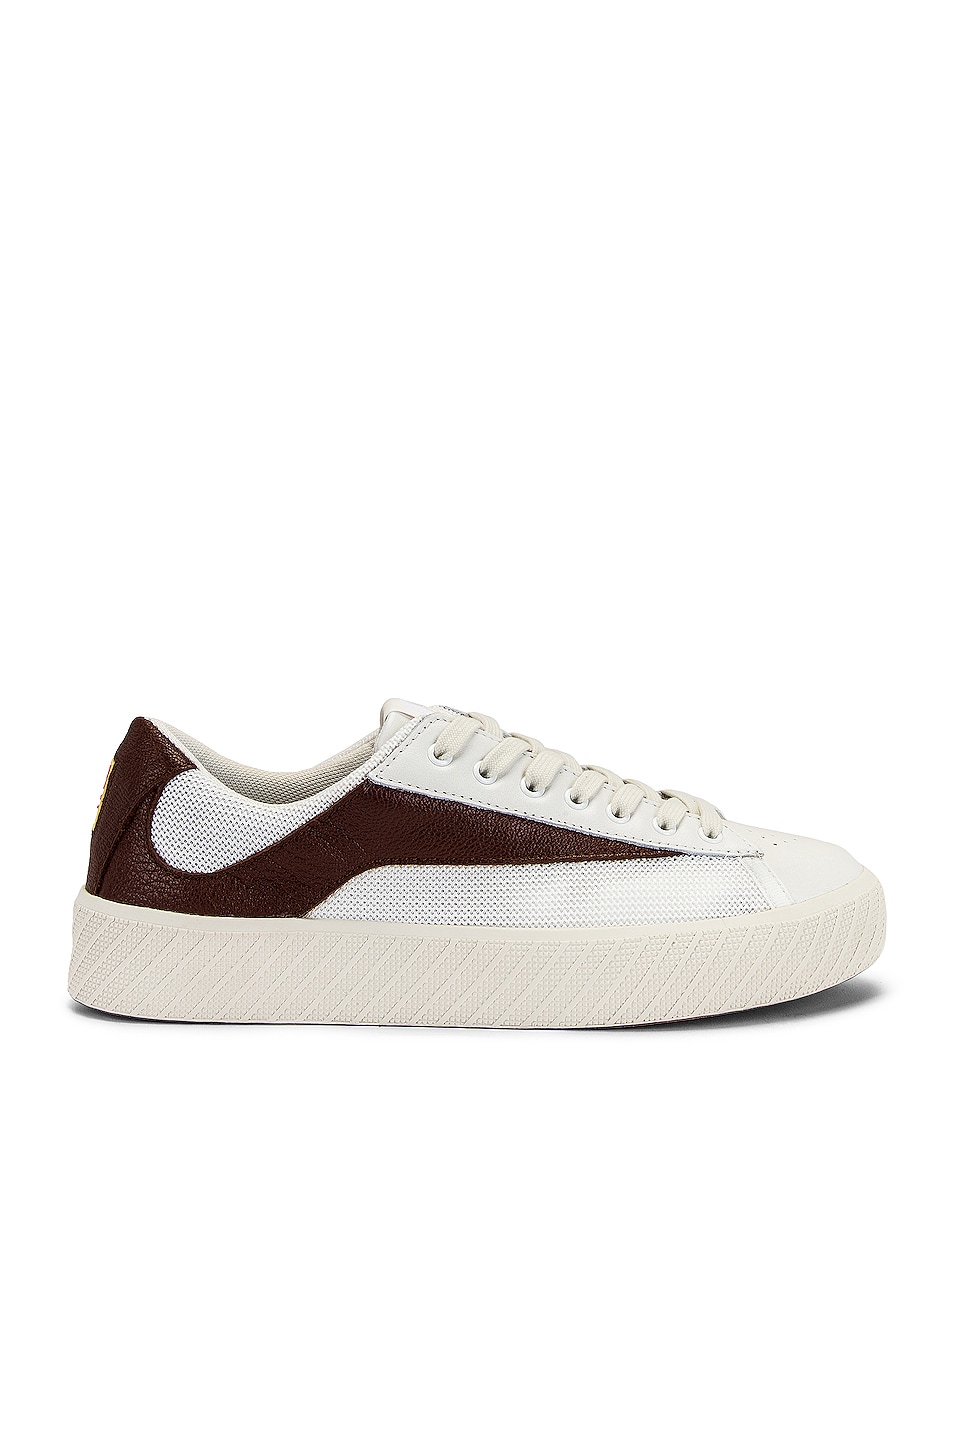 Image 1 of BY FAR Rodina Sneaker in White & Tabac